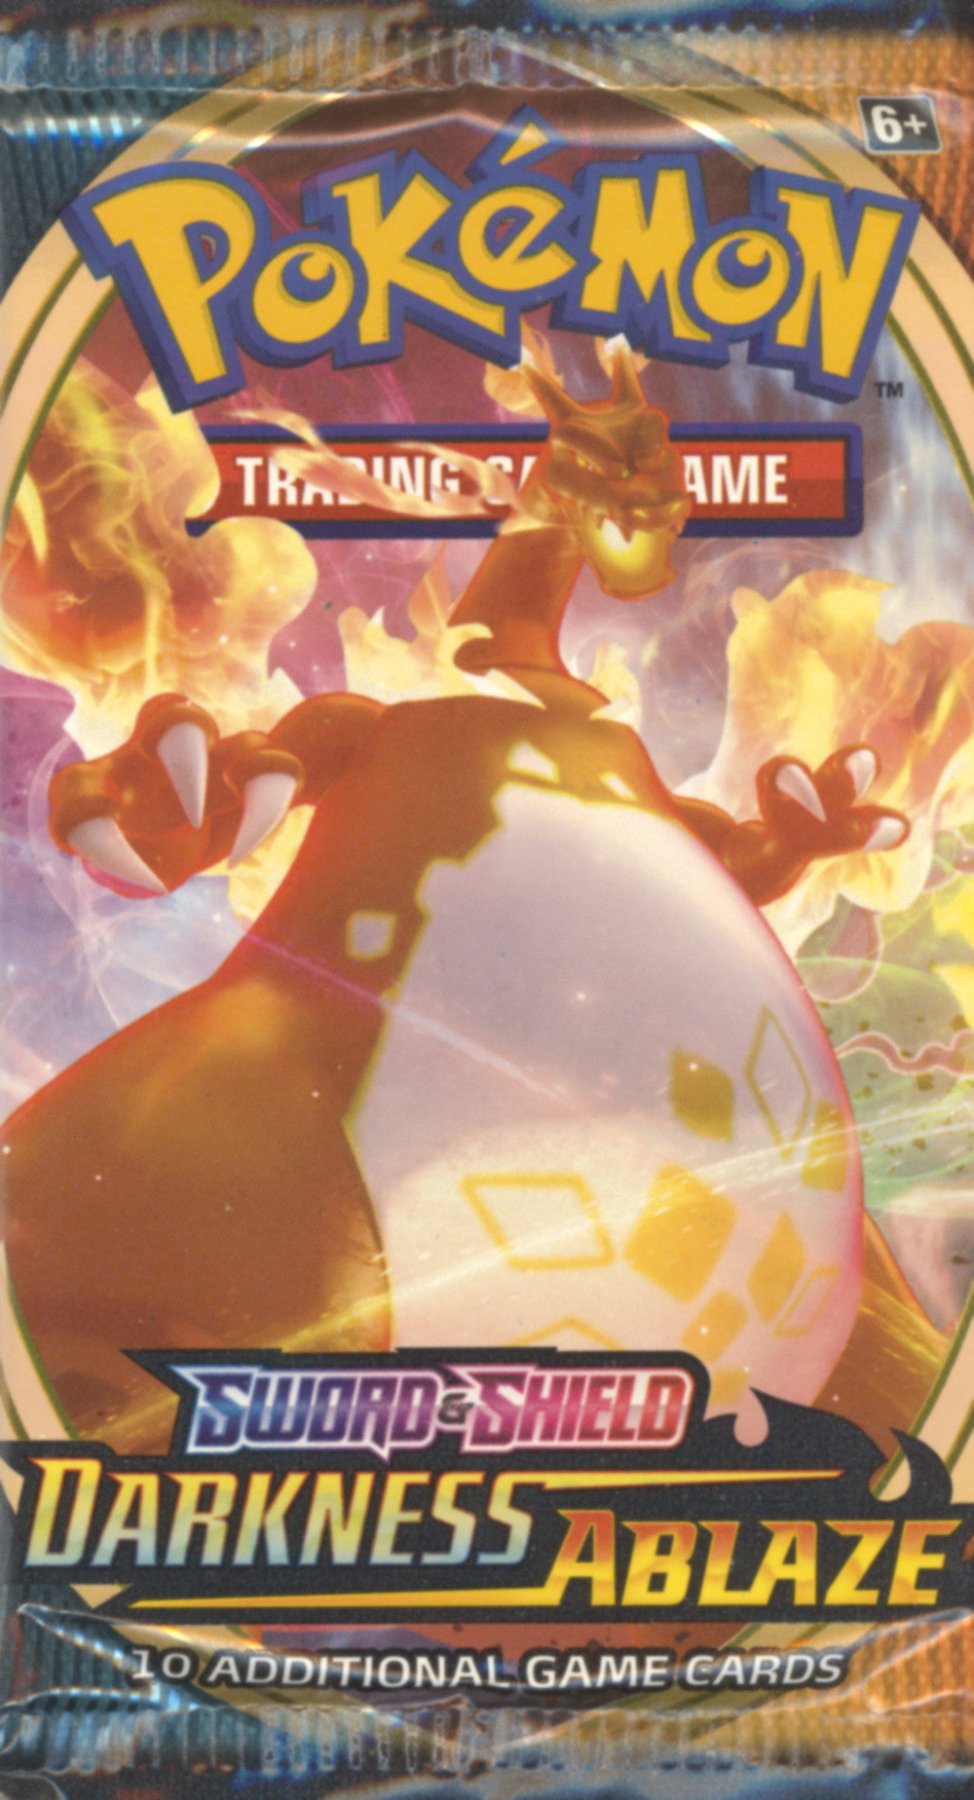 Pokémon Trading Card Game: Darkness Ablaze Booster Pack - Retro Island Gaming